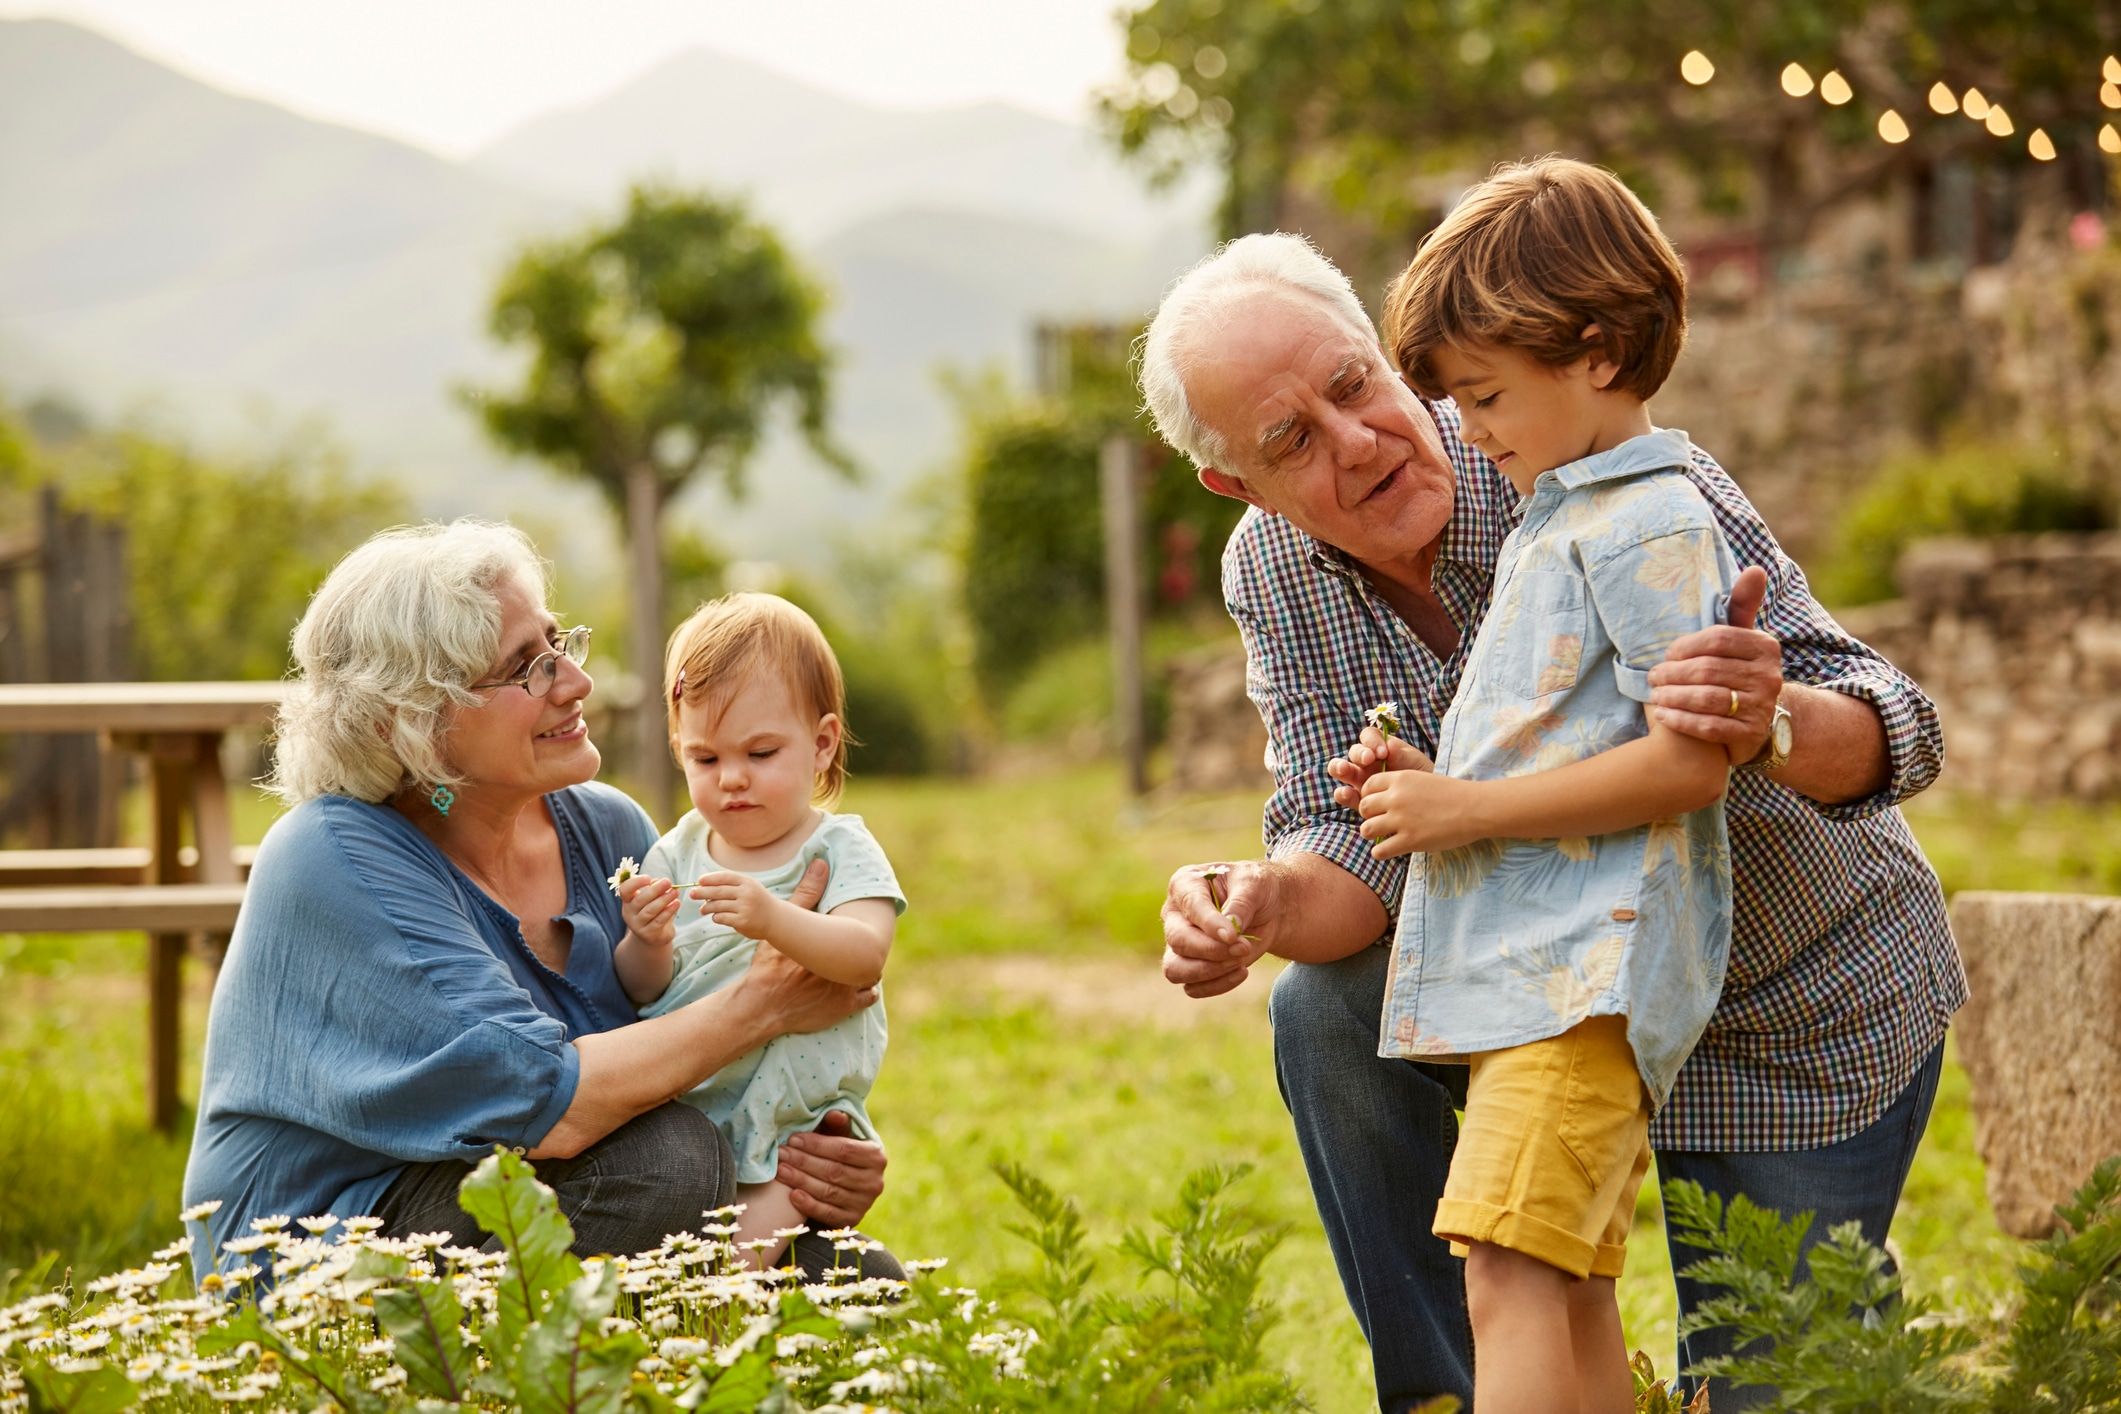 5 activities to do with seniors that will lift their spirits — and yours